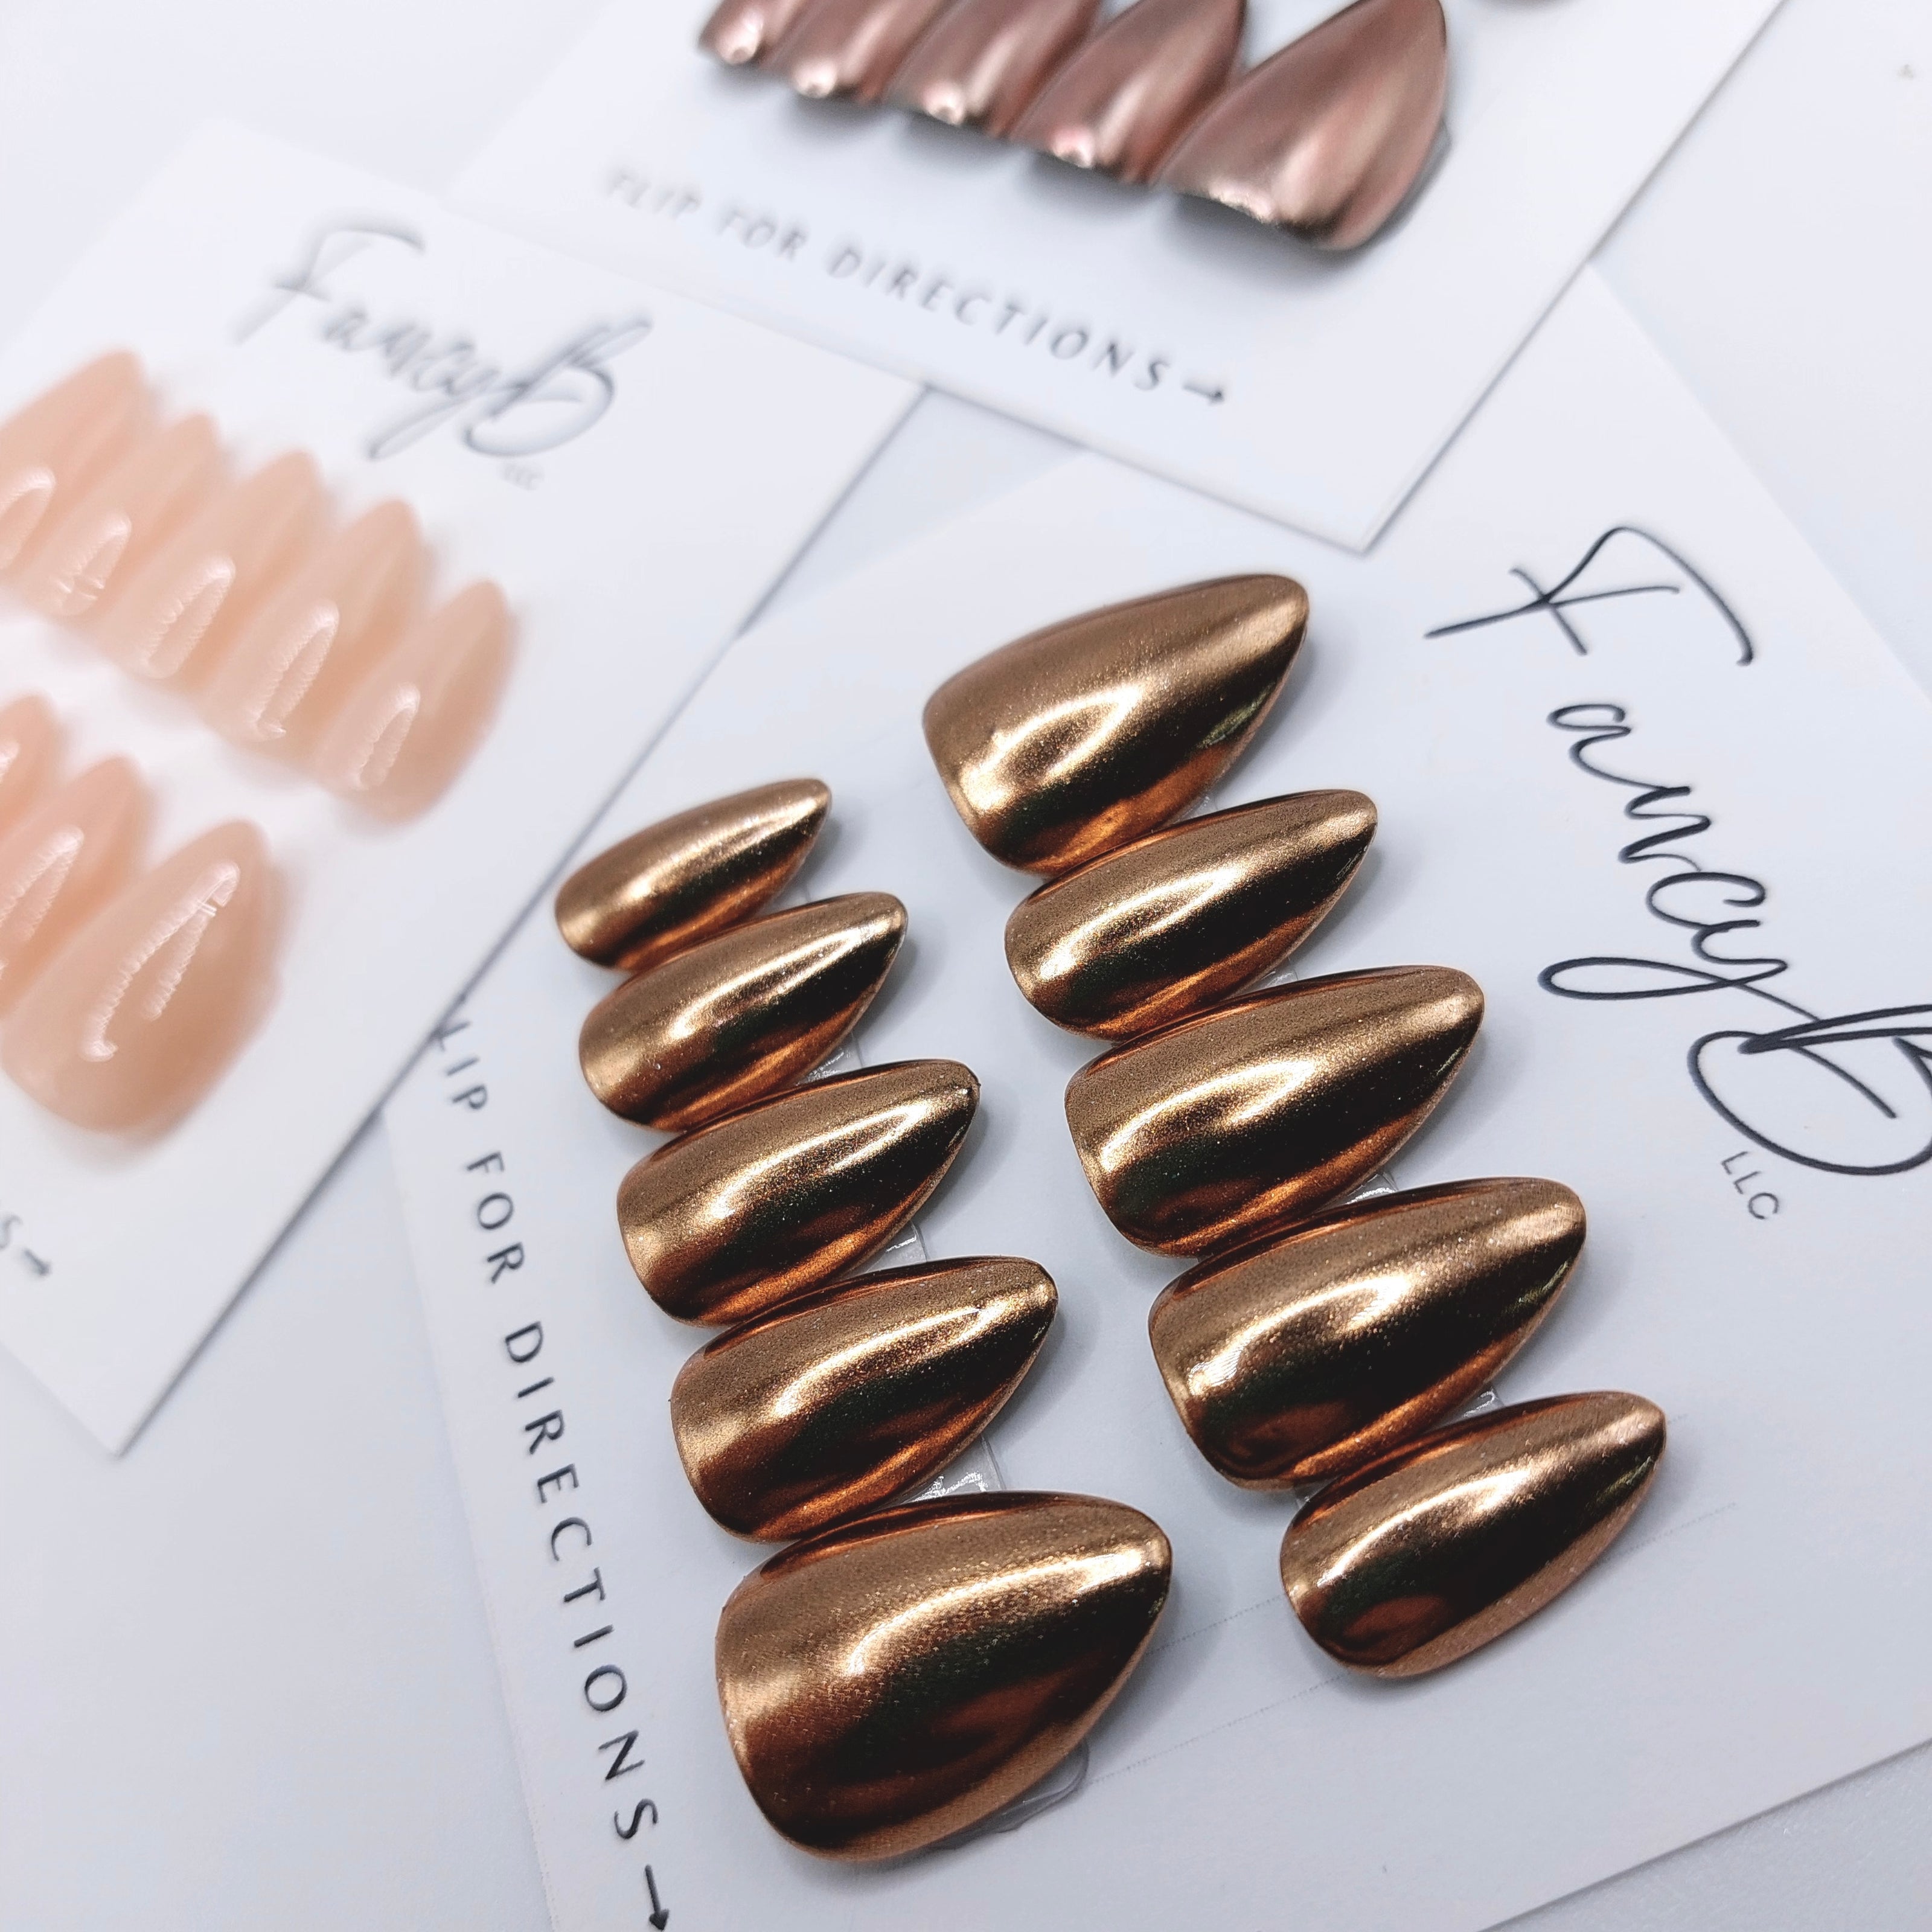 Chrome press on nails, champagne chrome and rose gold chrome in short almond shape. FancyB Nails.